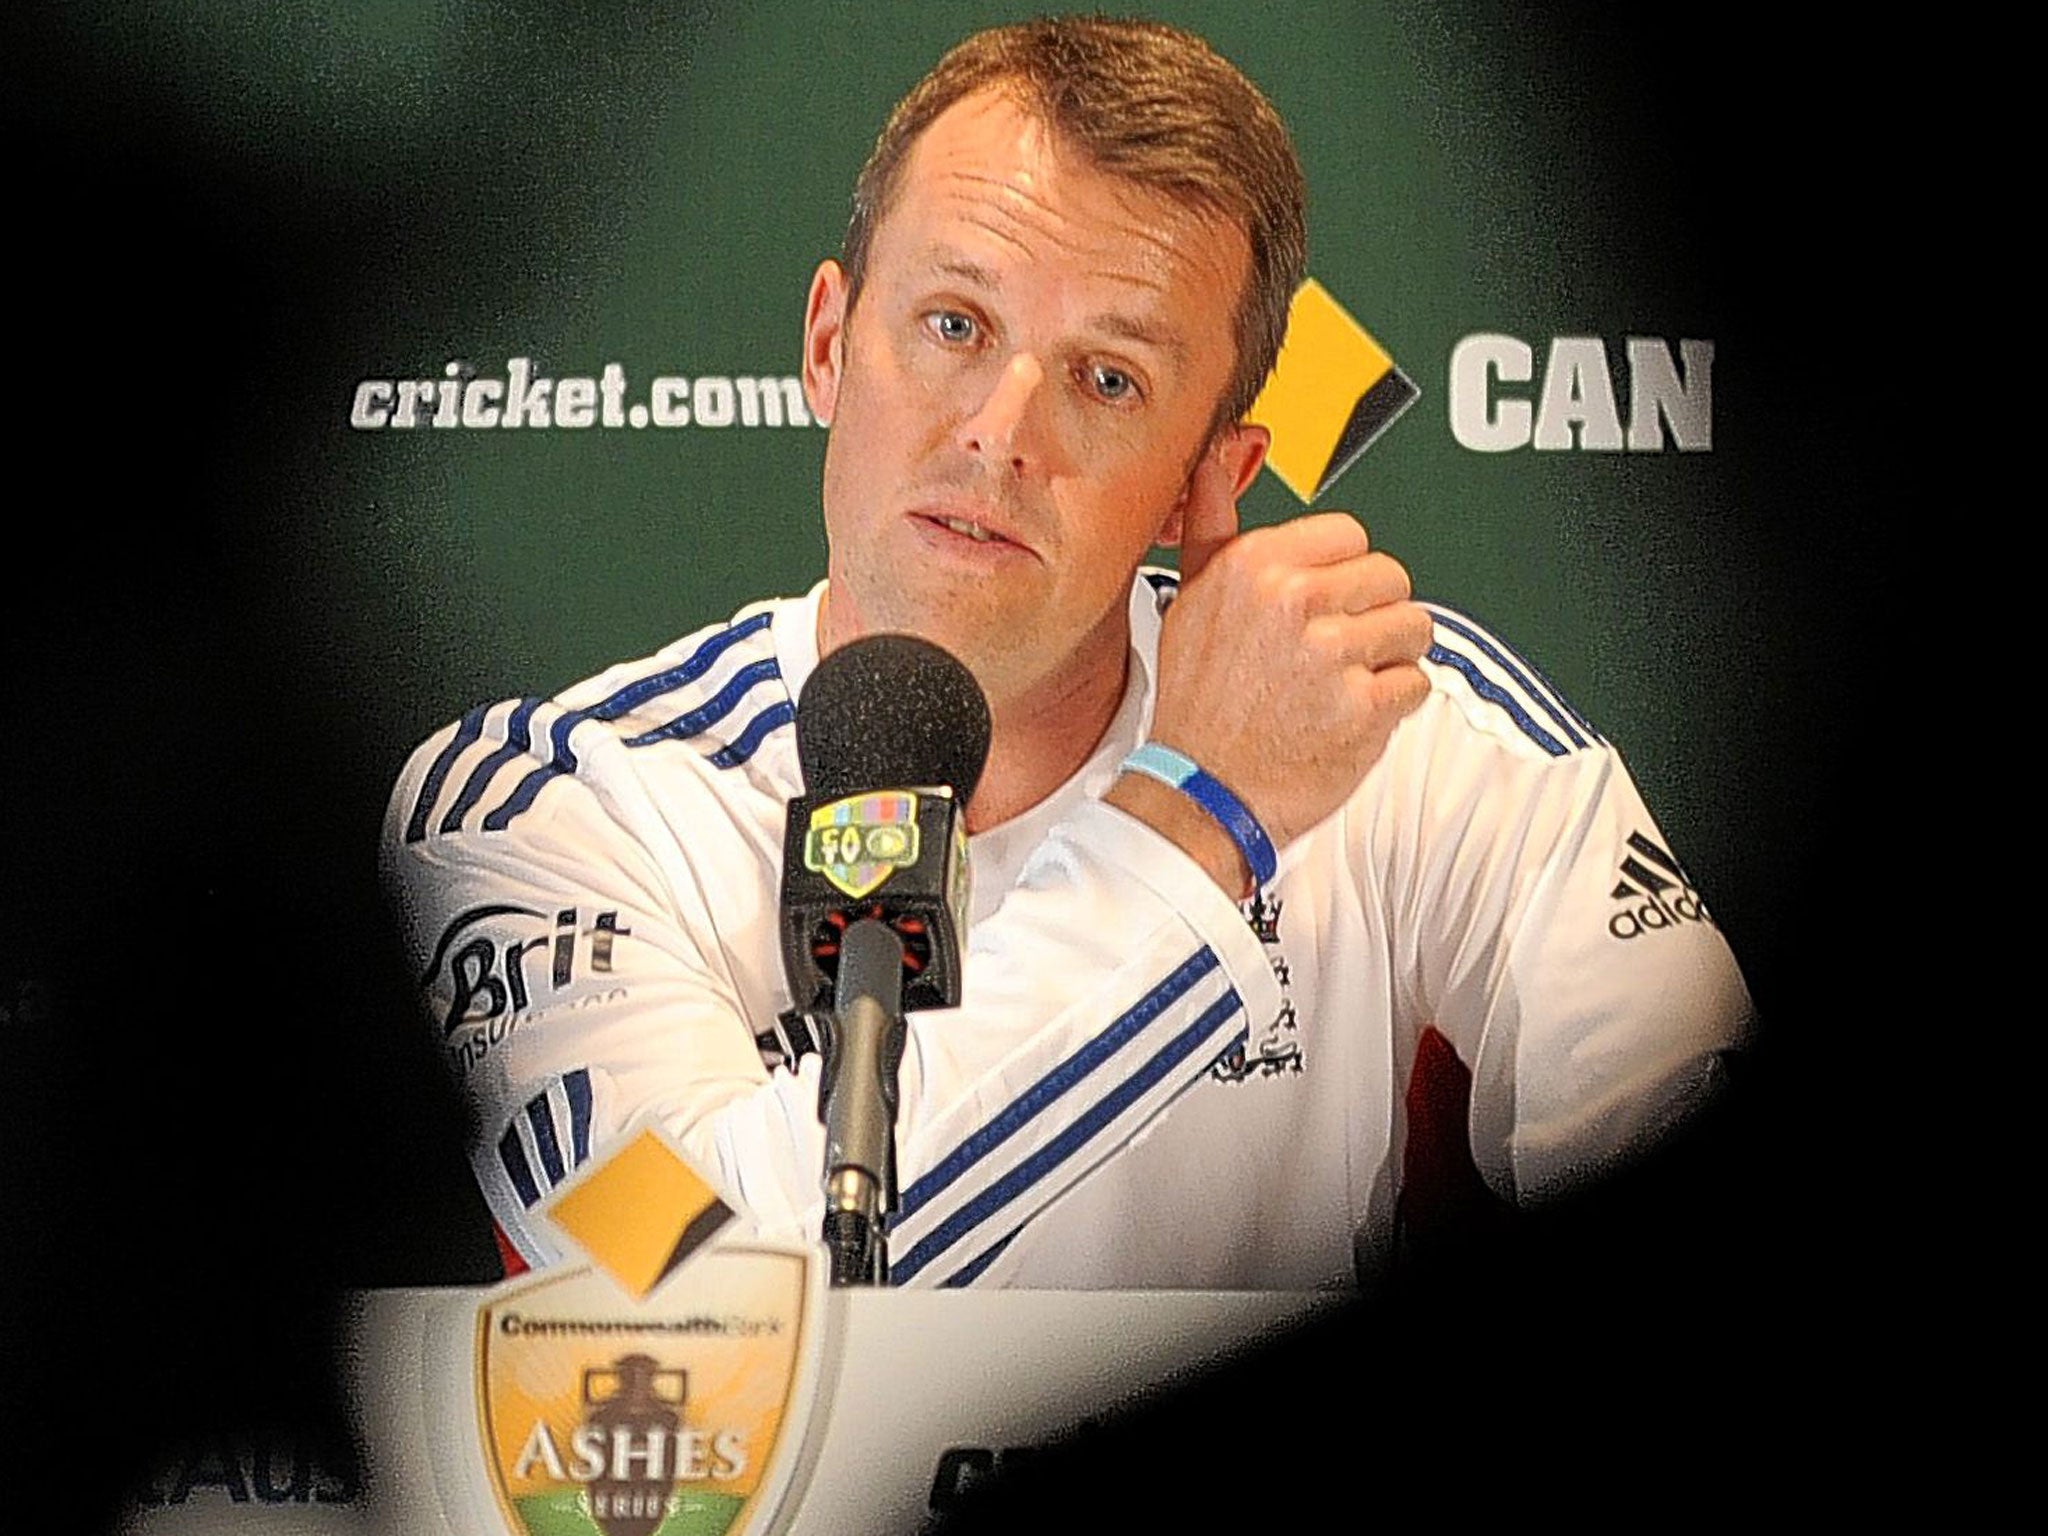 Graeme Swann announces his decision to retire from international and first-class cricket